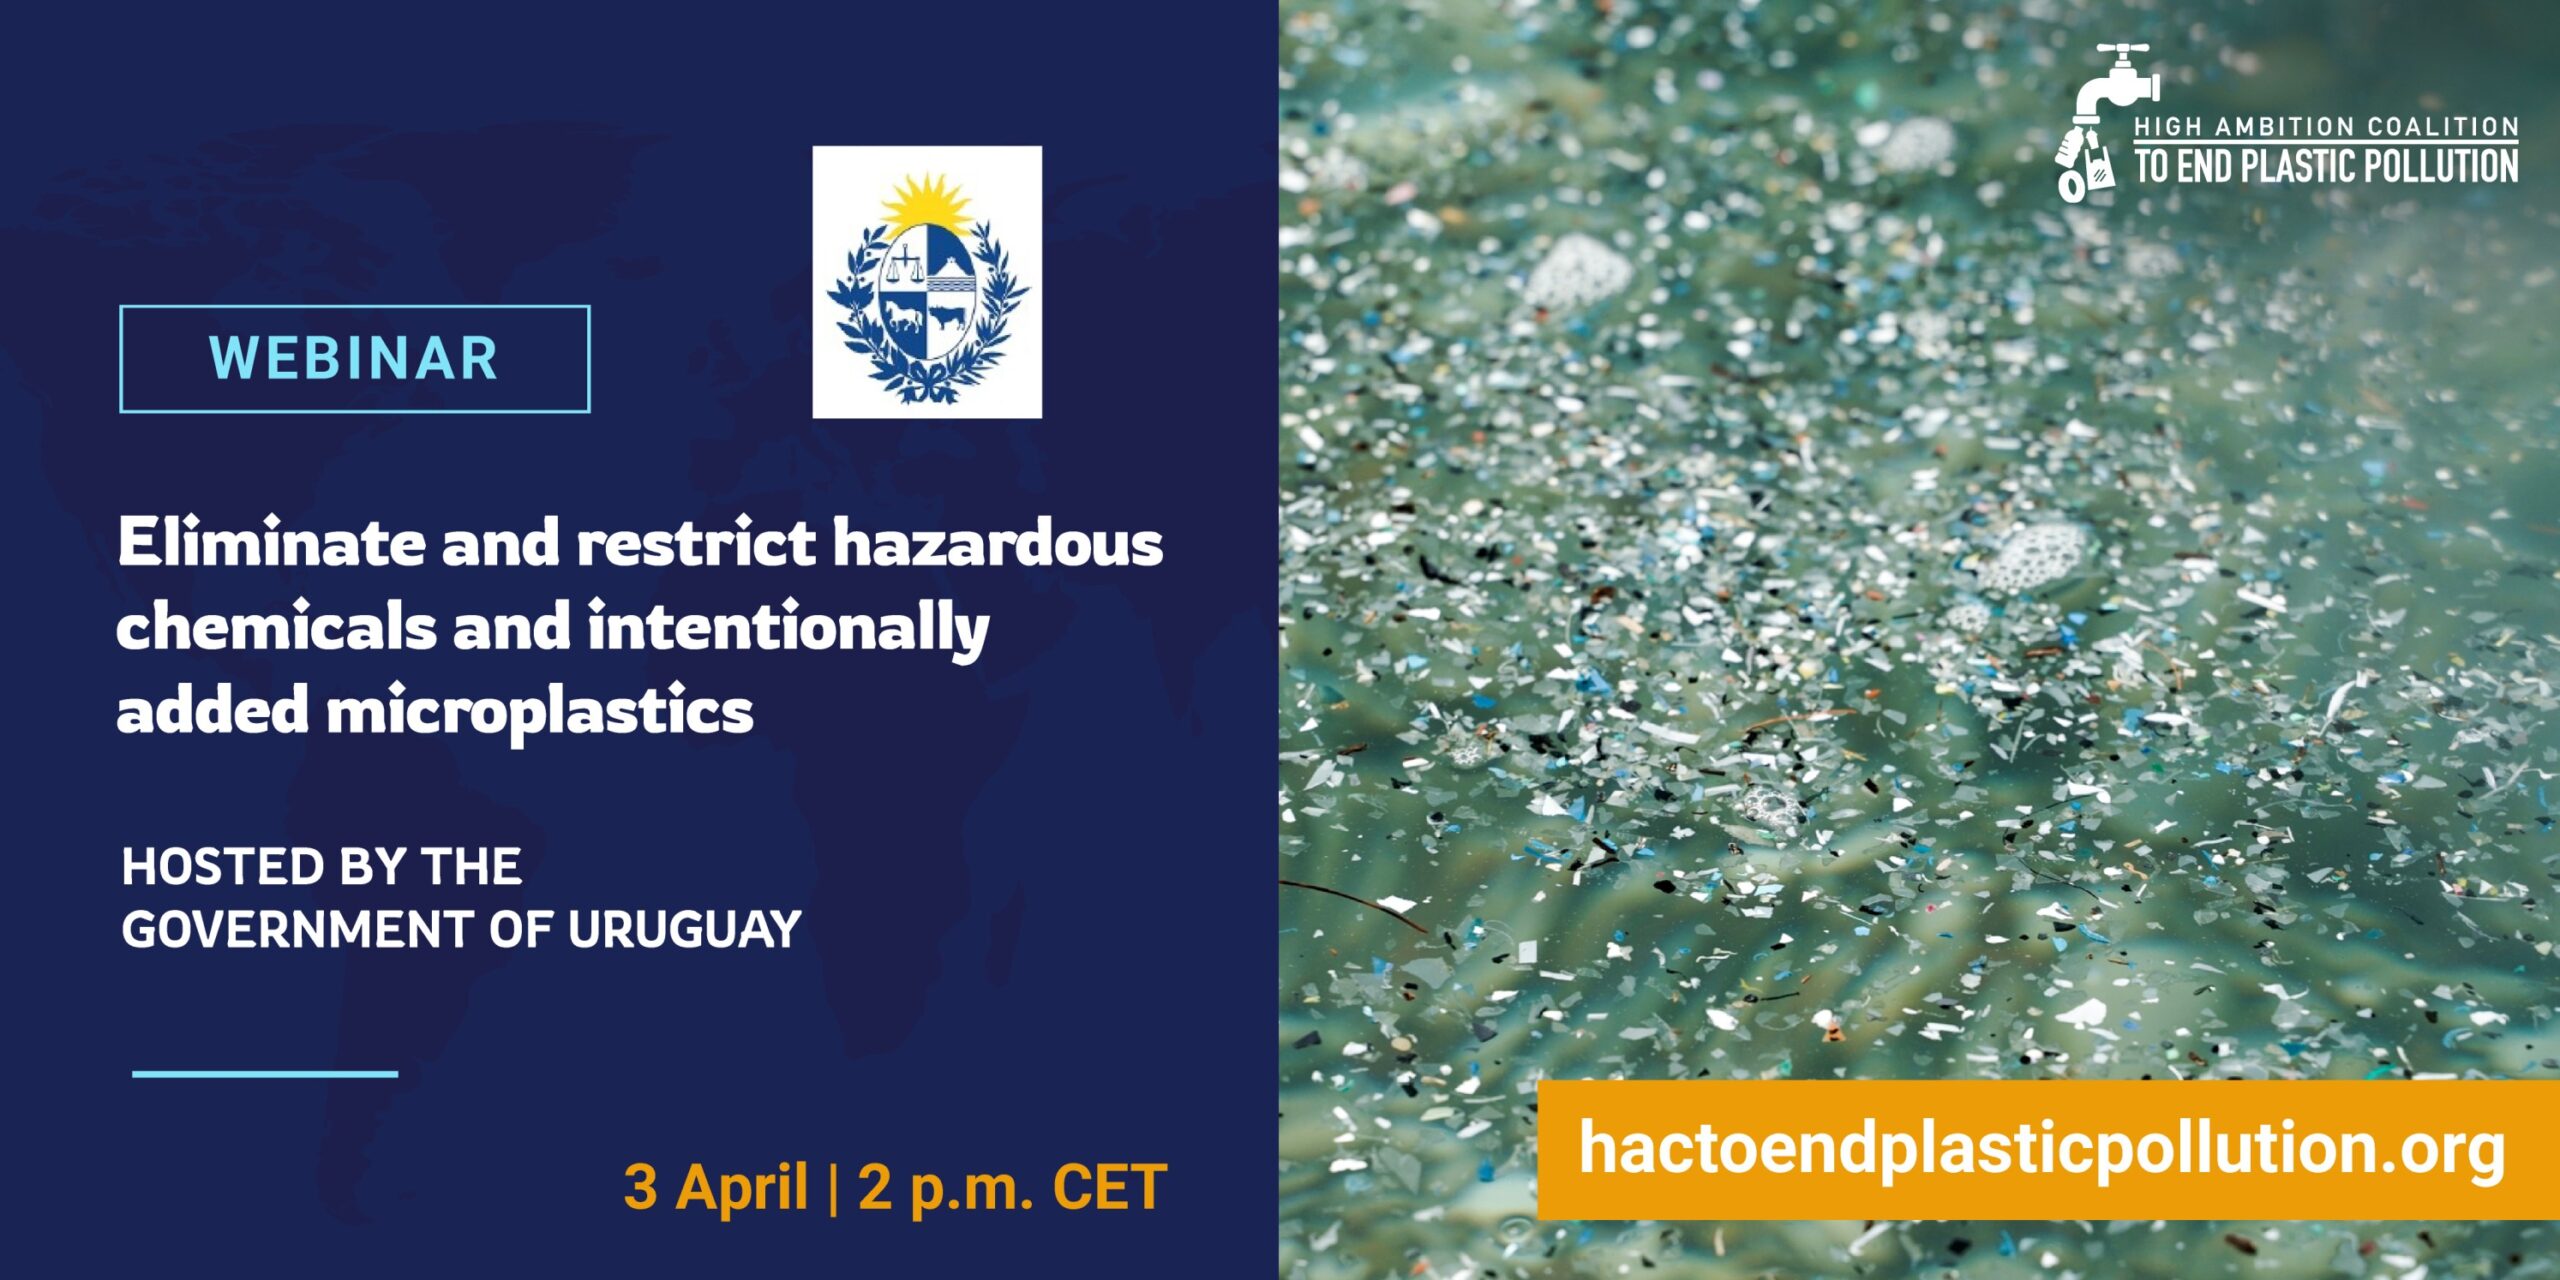 WEBINAR: Eliminate and restrict hazardous chemicals and intentionally added microplastics